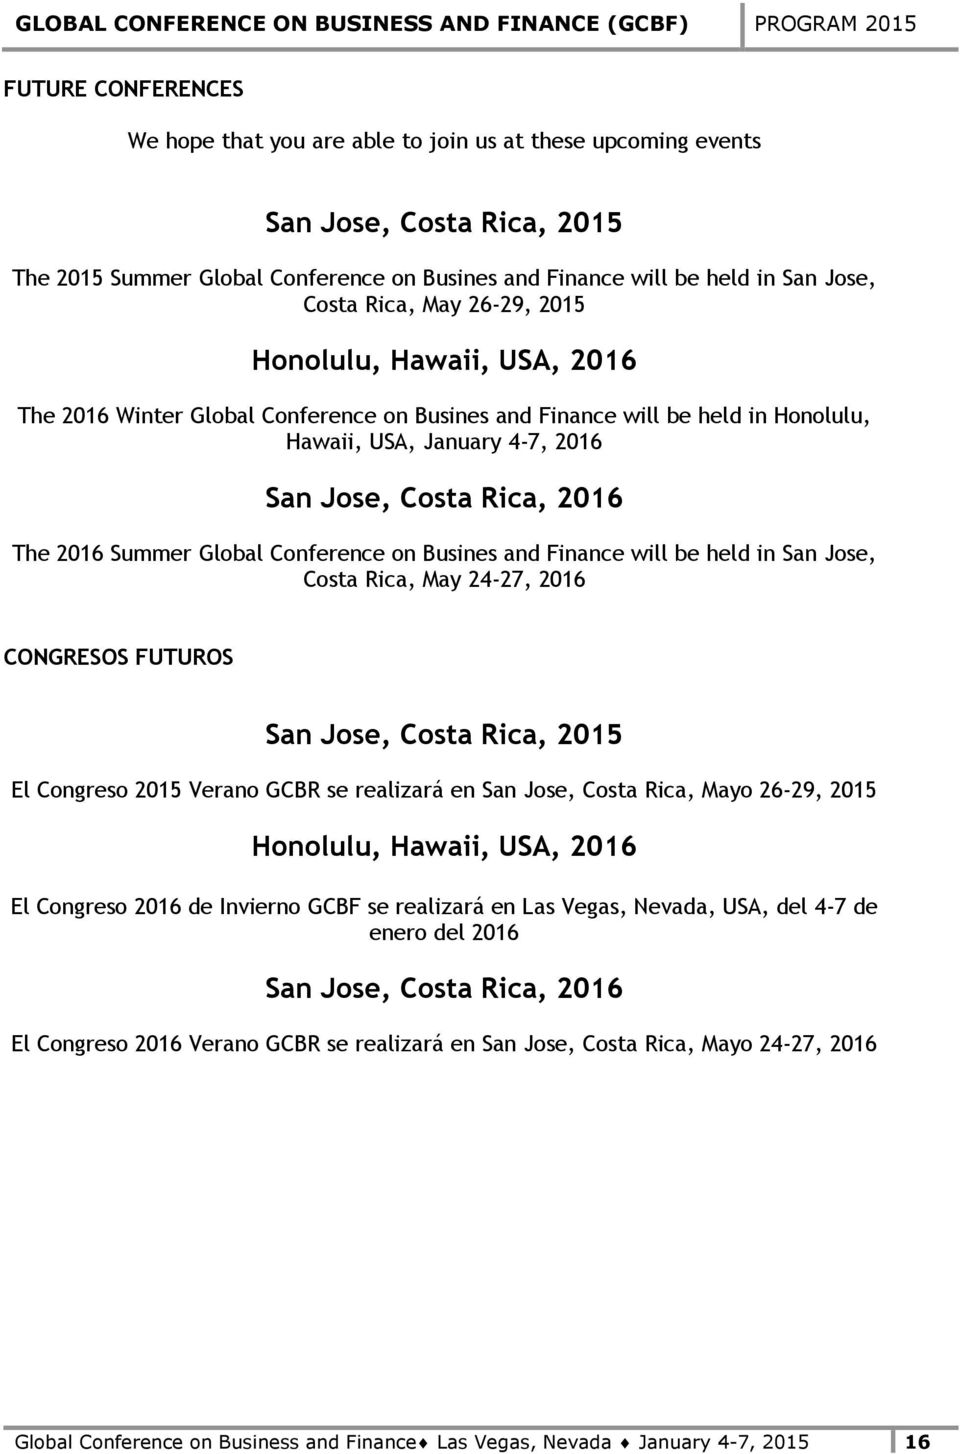 Summer Global Conference on Busines and Finance will be held in San Jose, Costa Rica, May 24-27, 2016 CONGRESOS FUTUROS San Jose, Costa Rica, 2015 El Congreso 2015 Verano GCBR se realizará en San